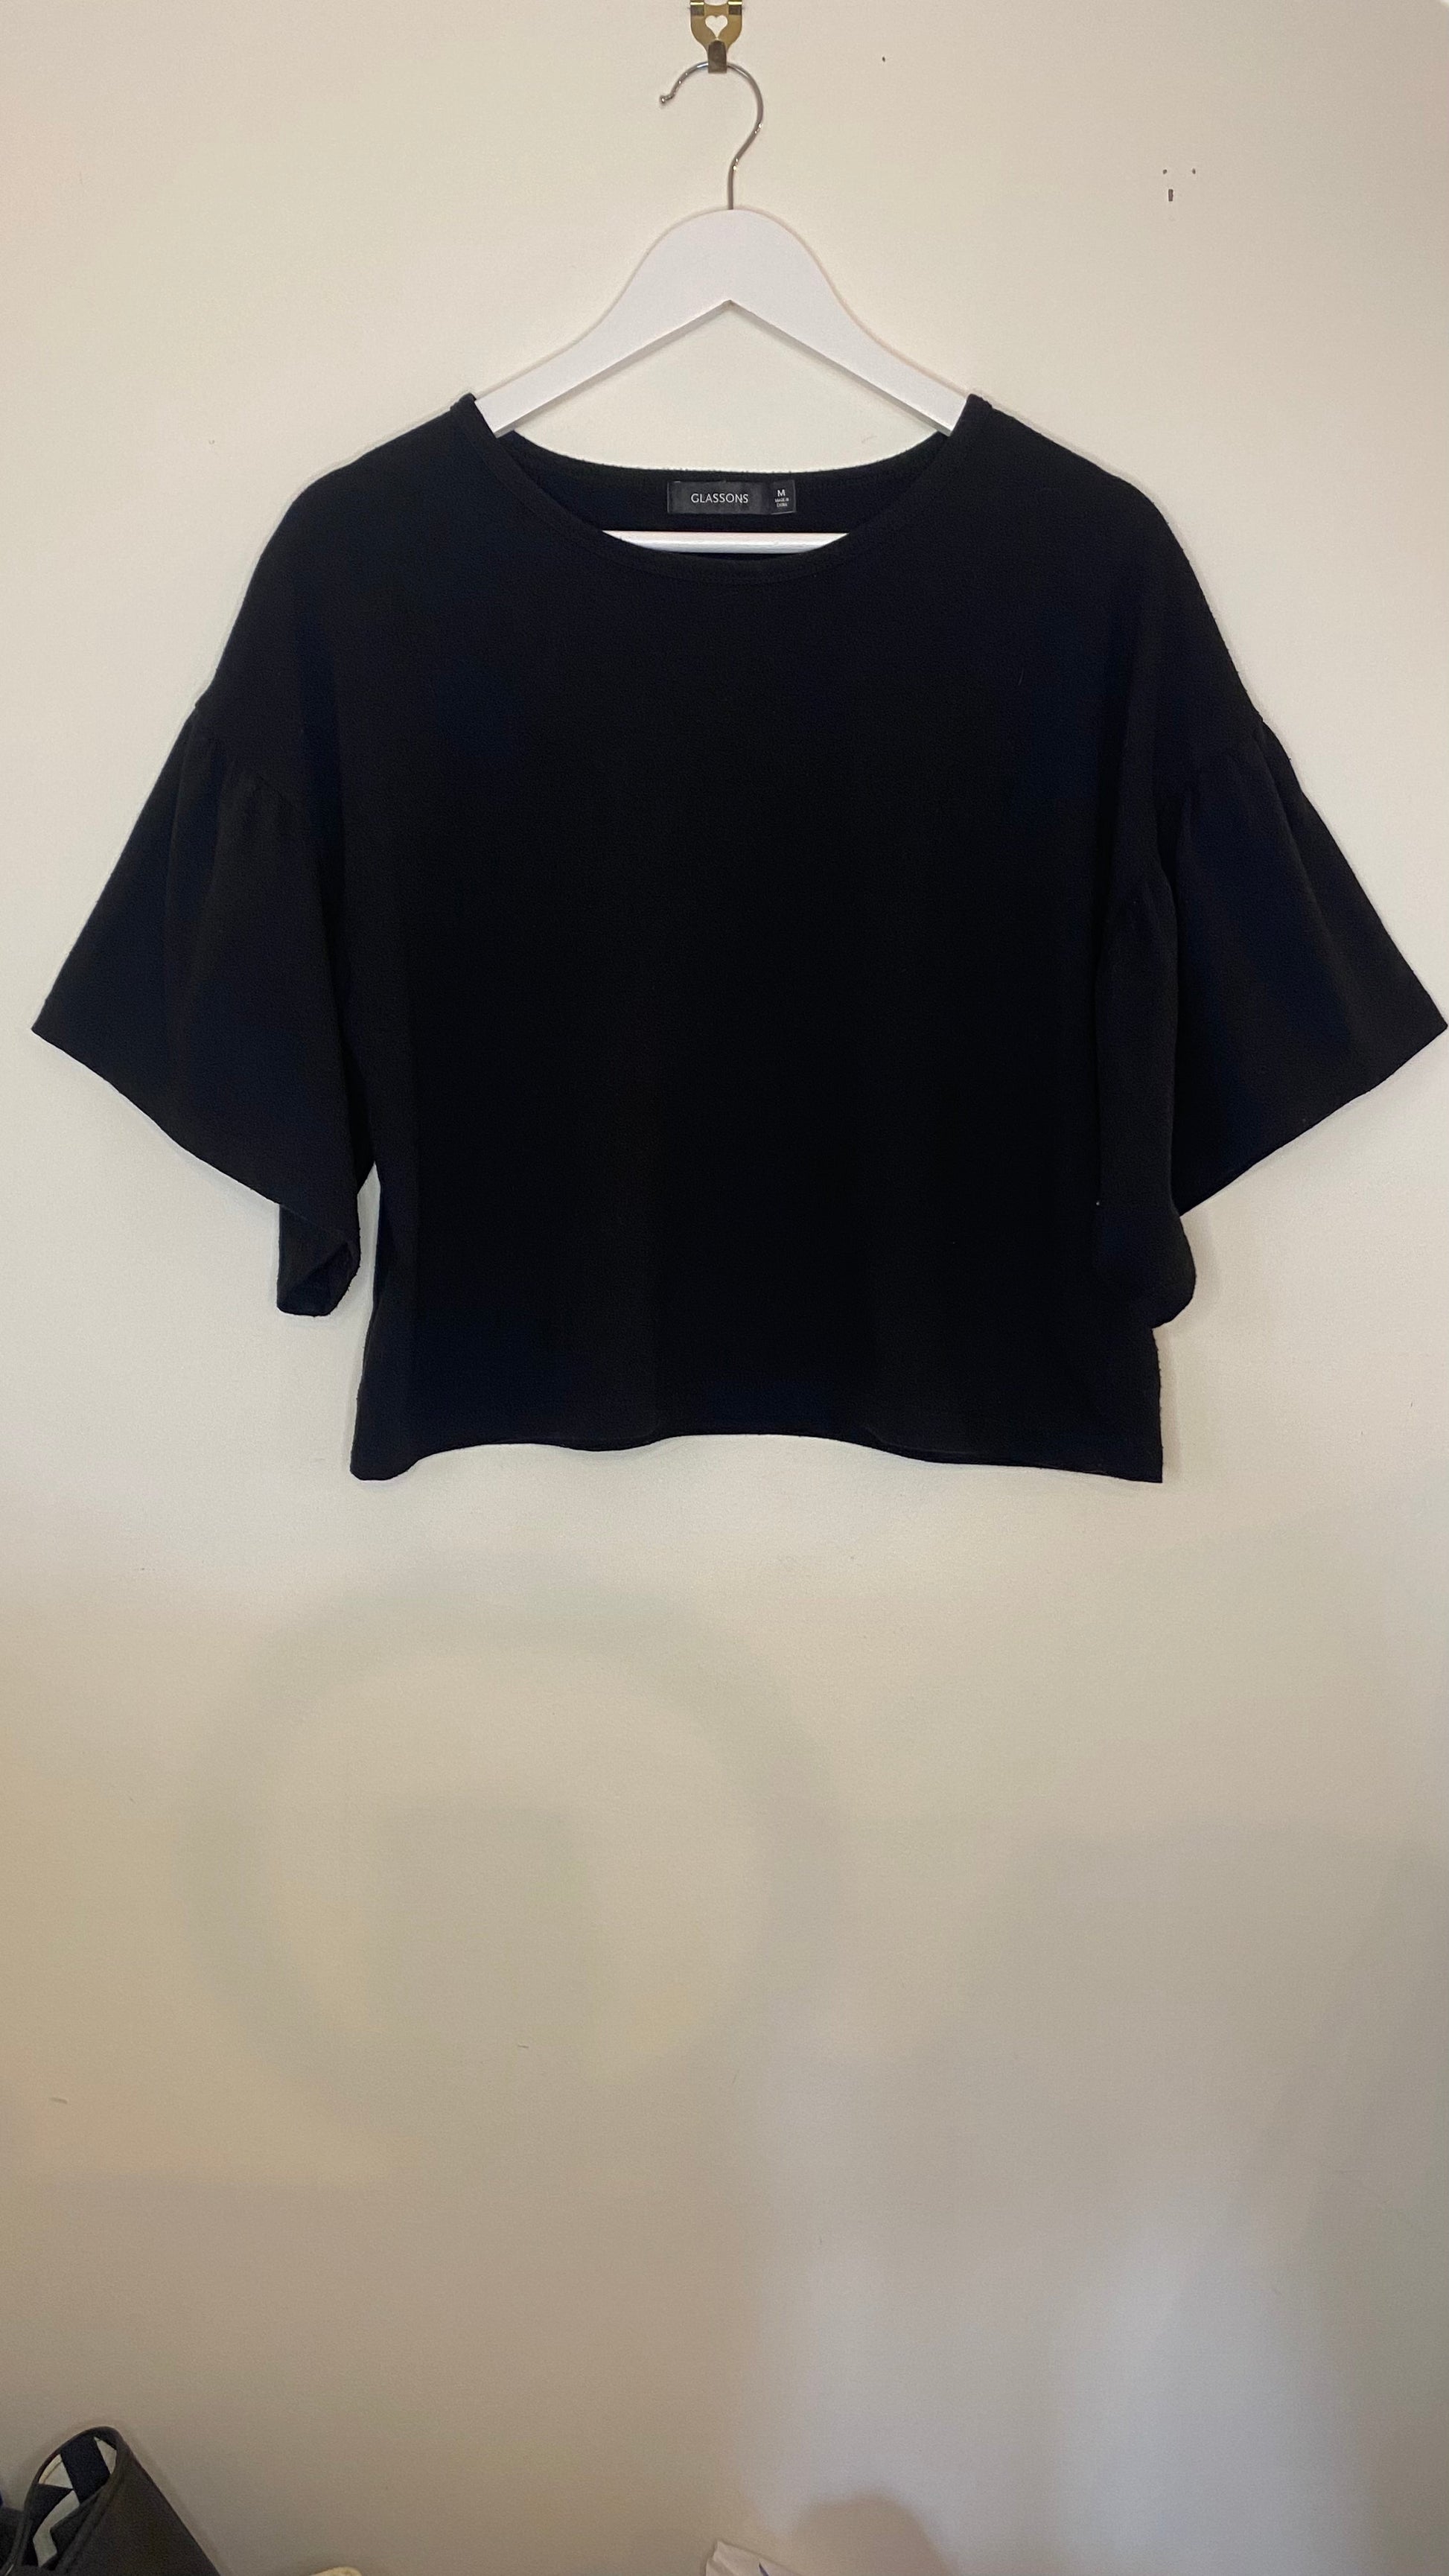 Black Glassons Wide Sleeve Top - Getting Thrifty